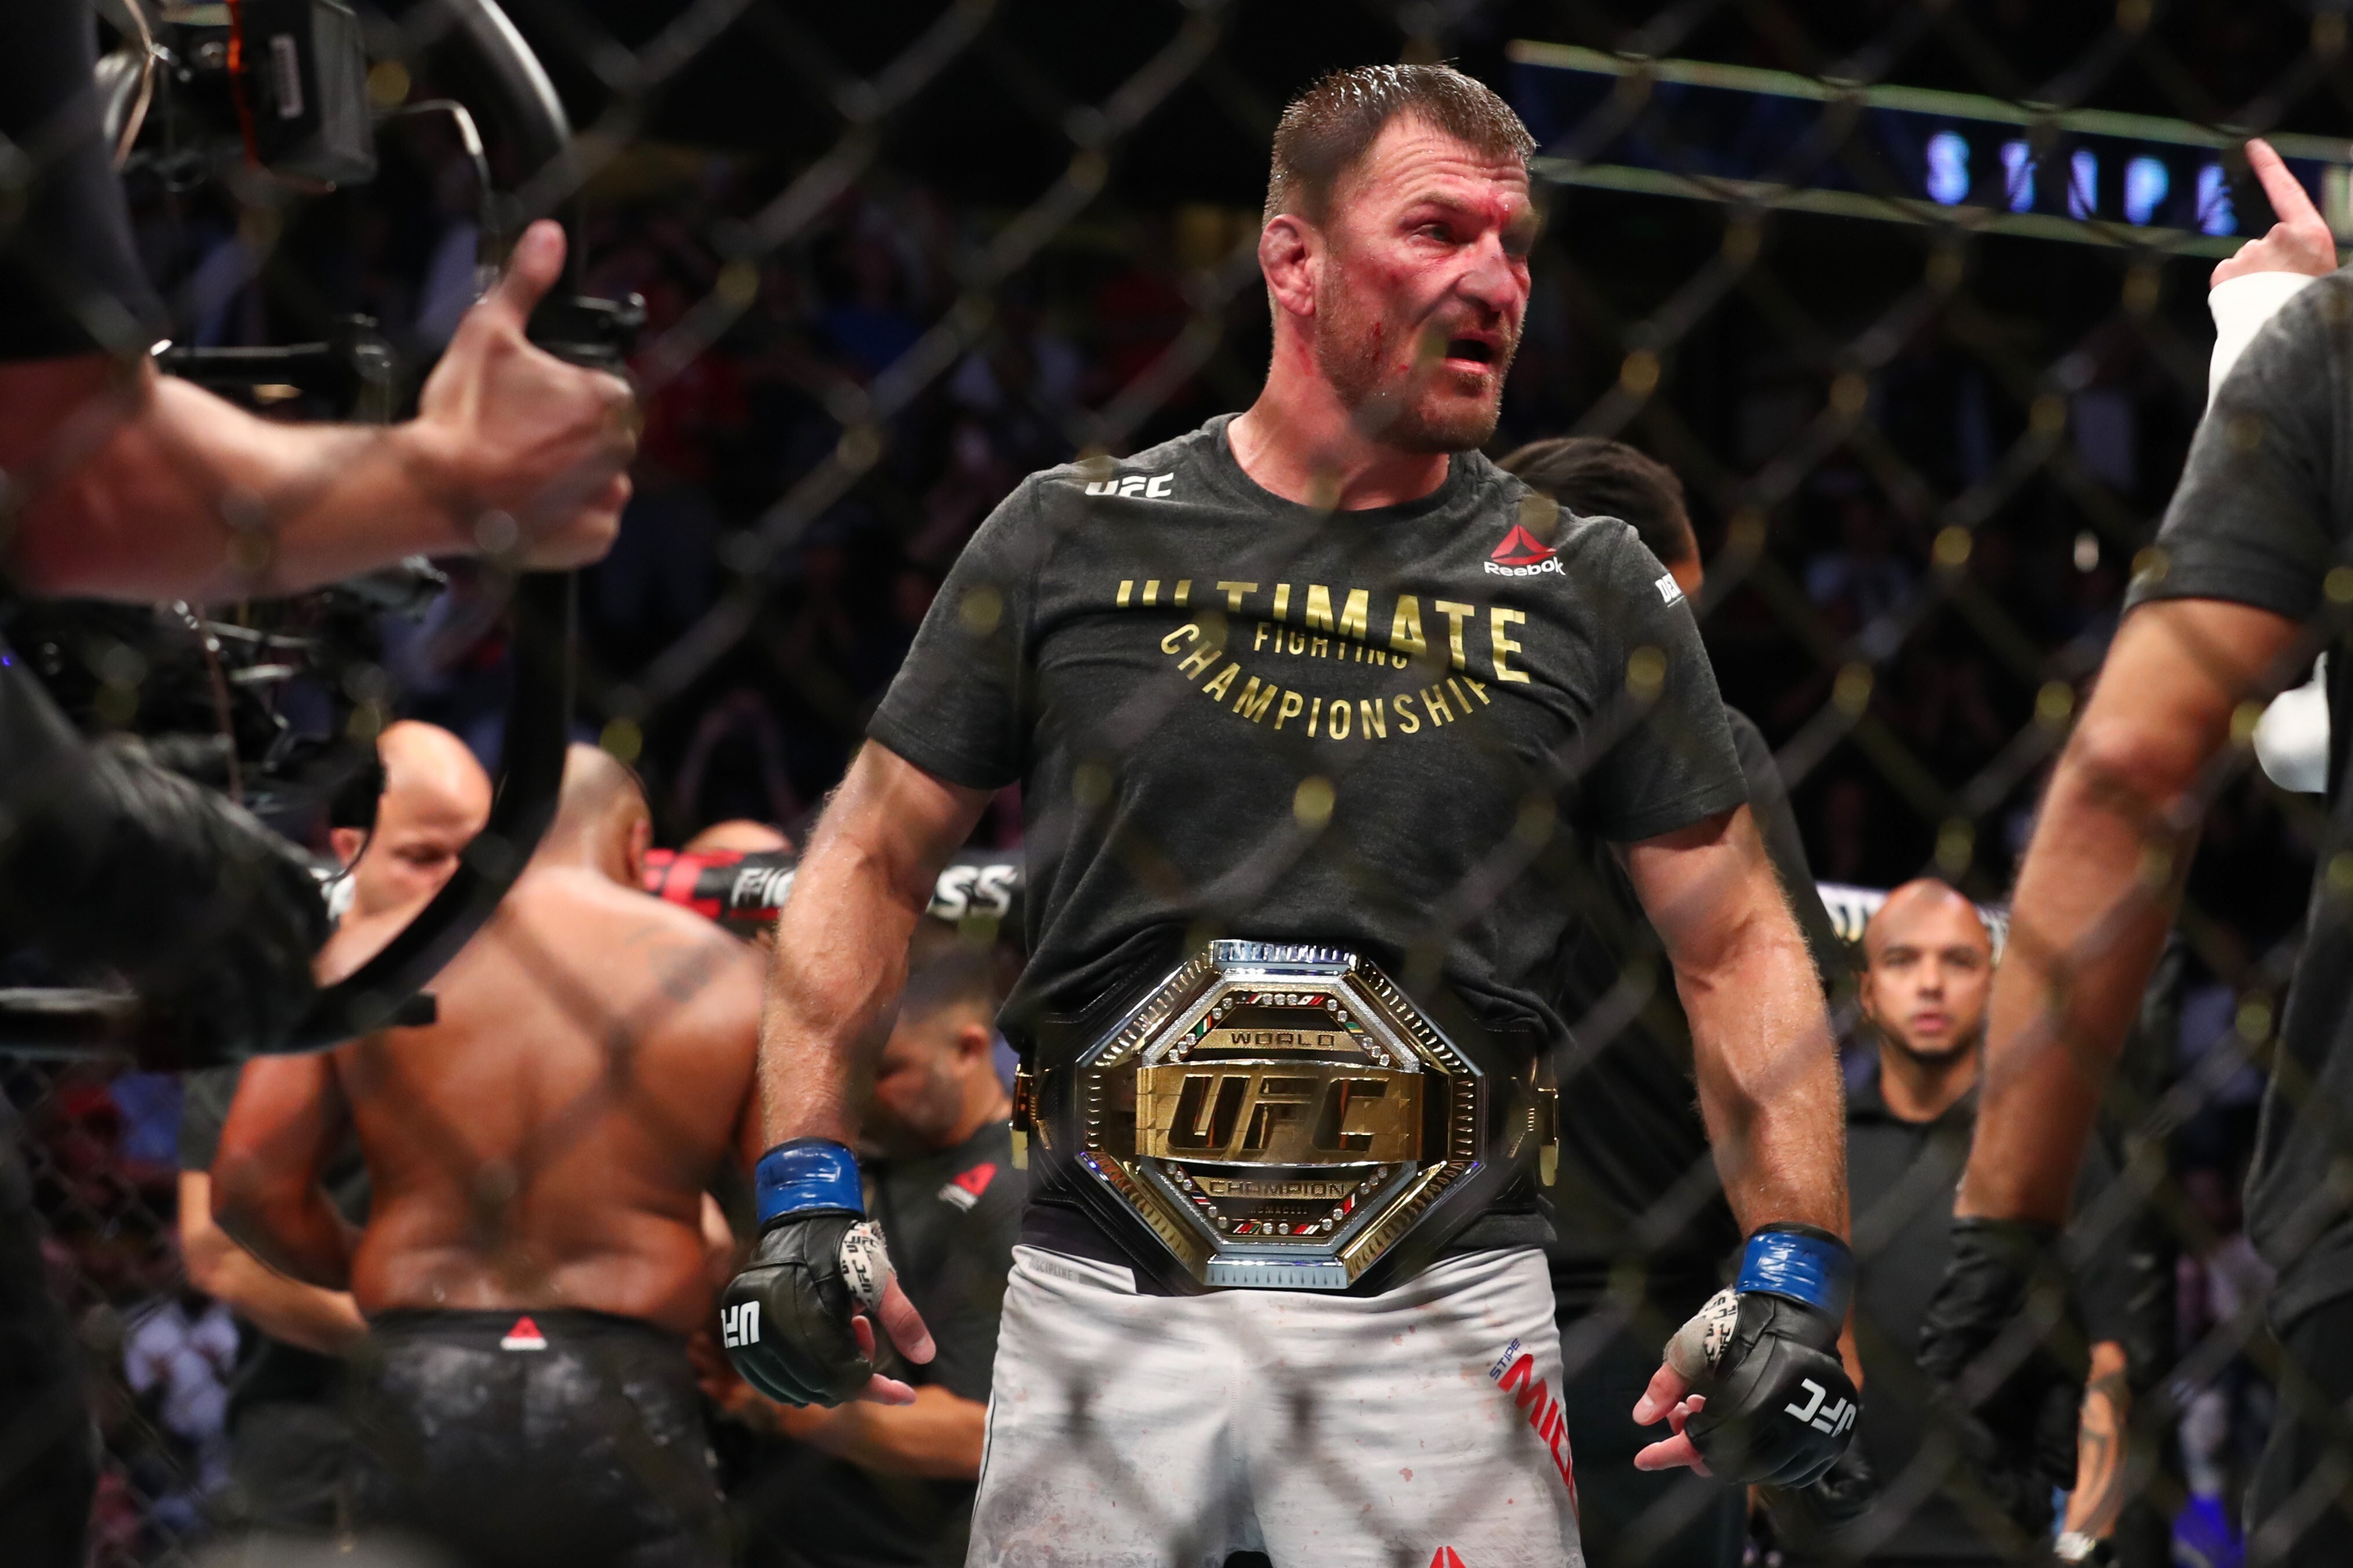 UFC heavyweight champion Stipe Miocic wins against Daniel Cormier at UFC 241 in 2019. Photo: Getty Images/AFP